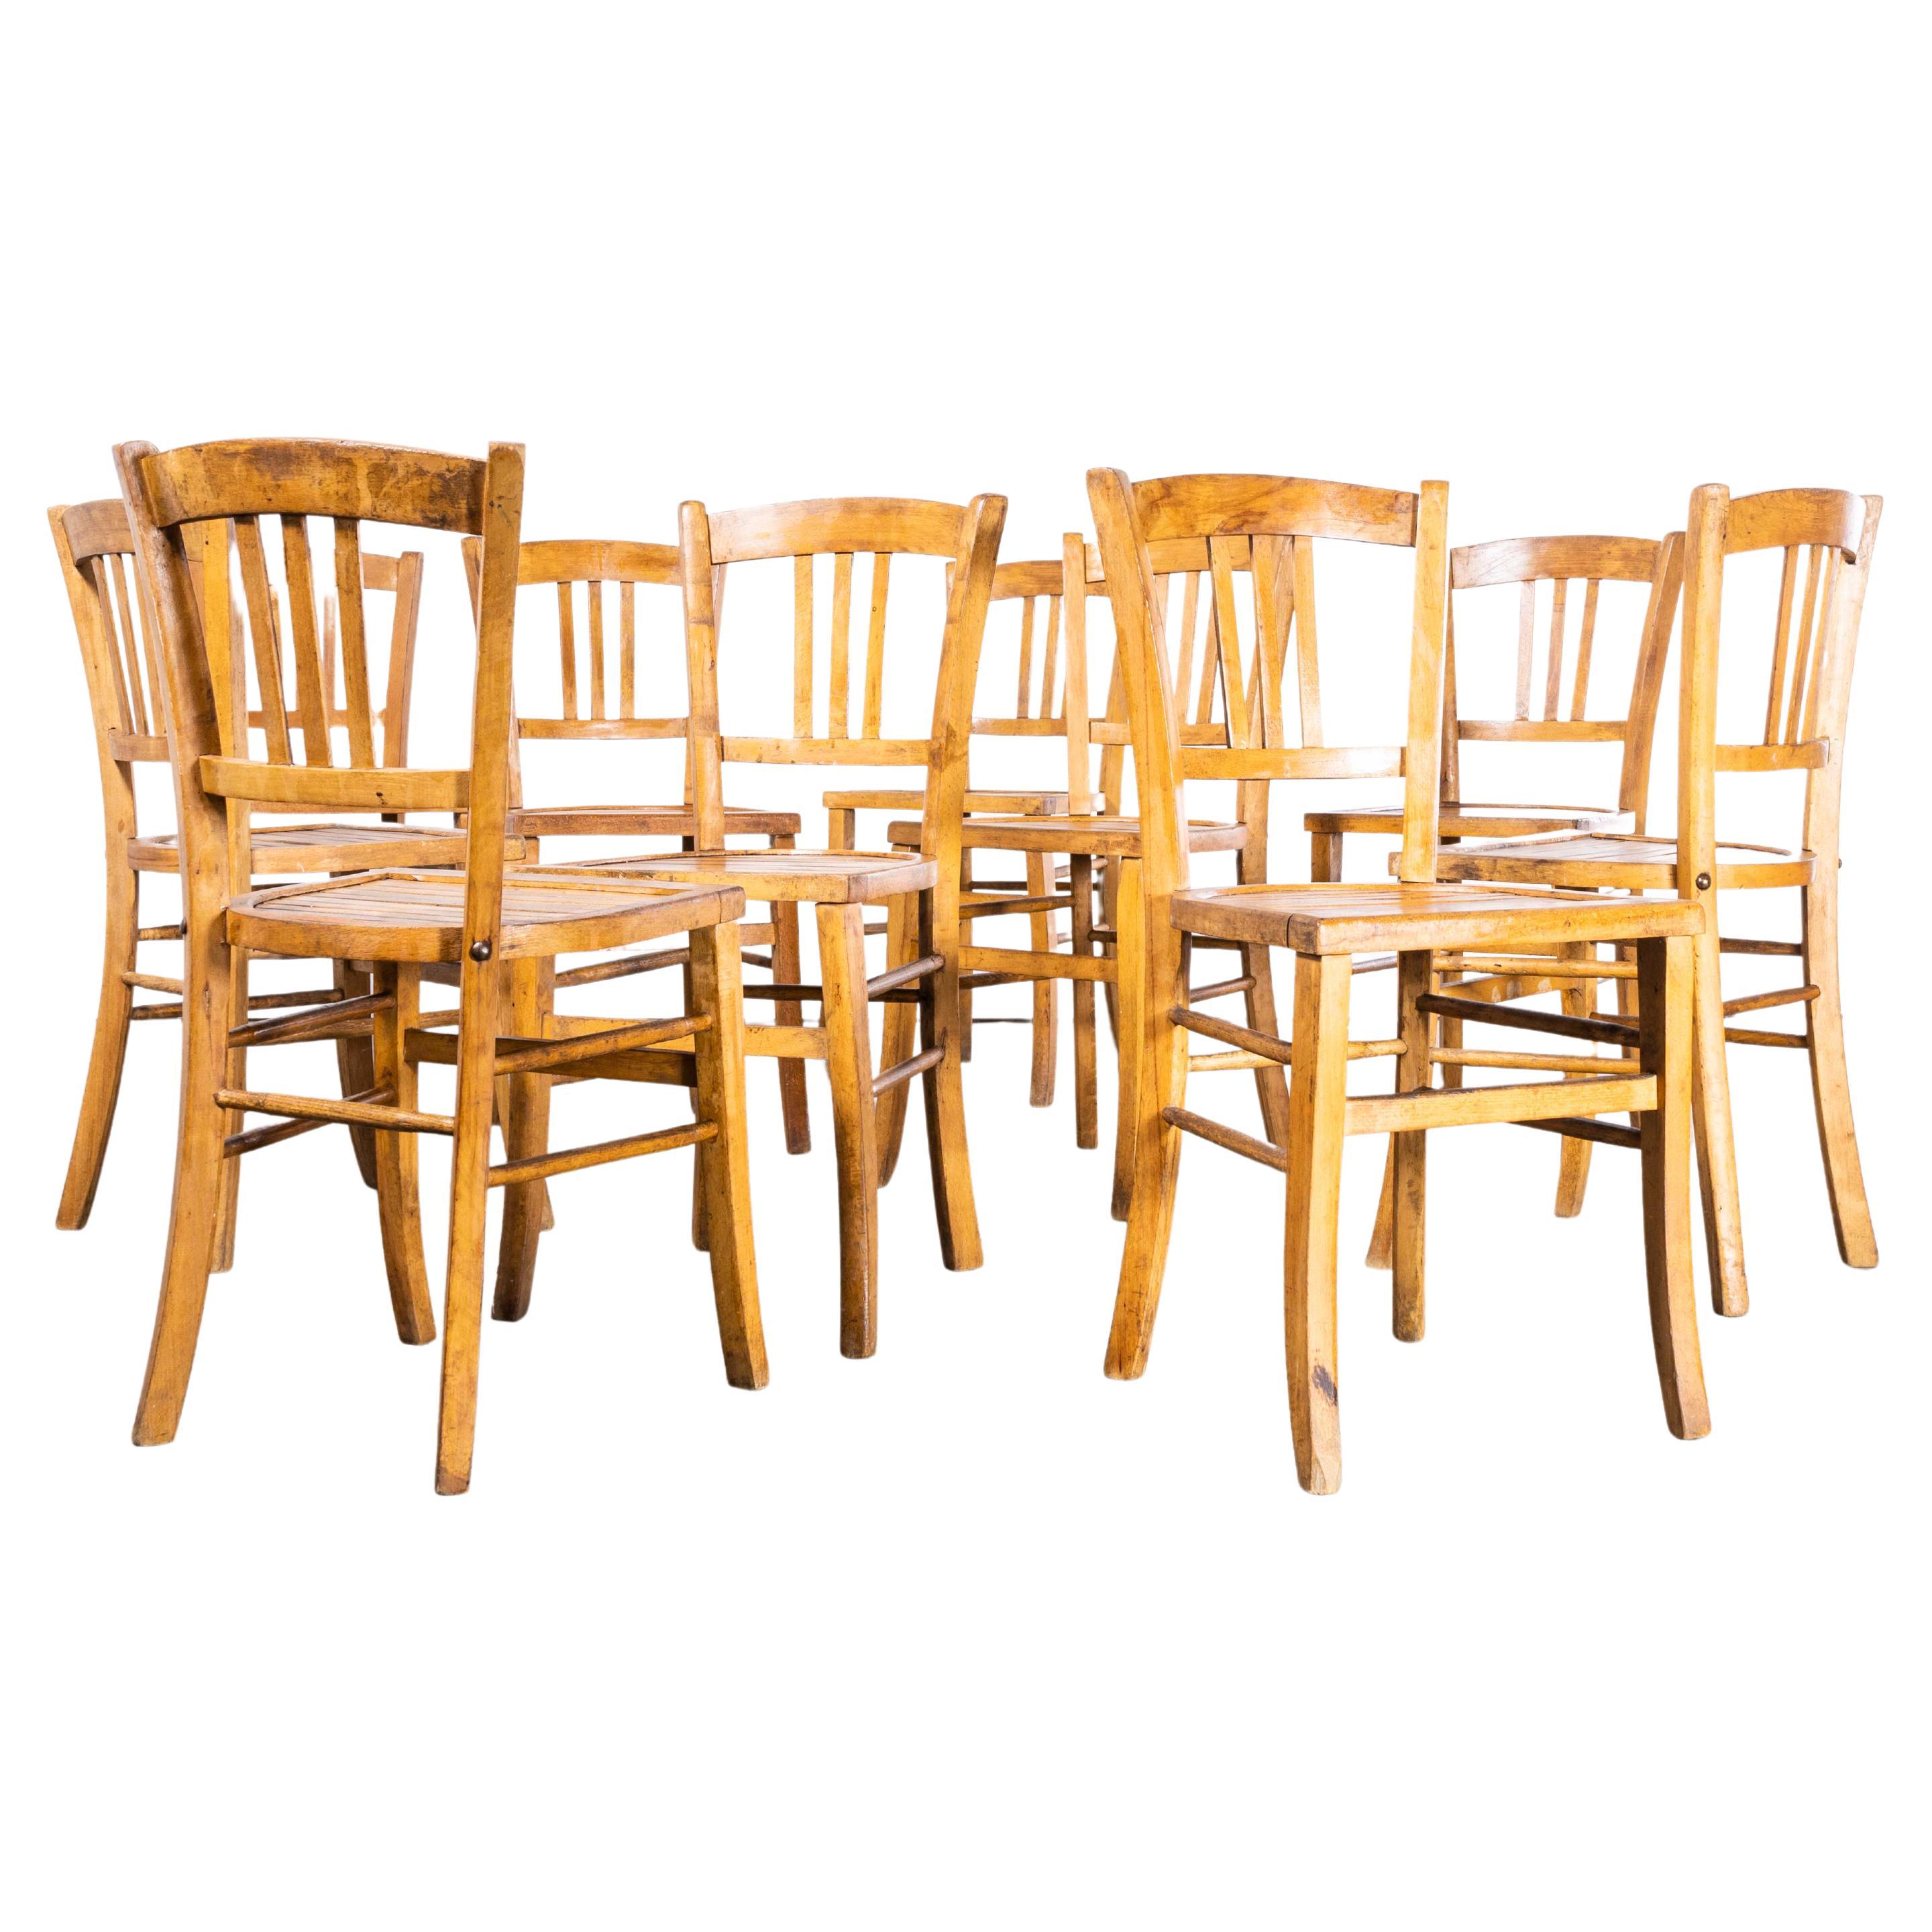 1950's Original French Slatted Farmhouse Chairs From Provence - Set Of Ten For Sale